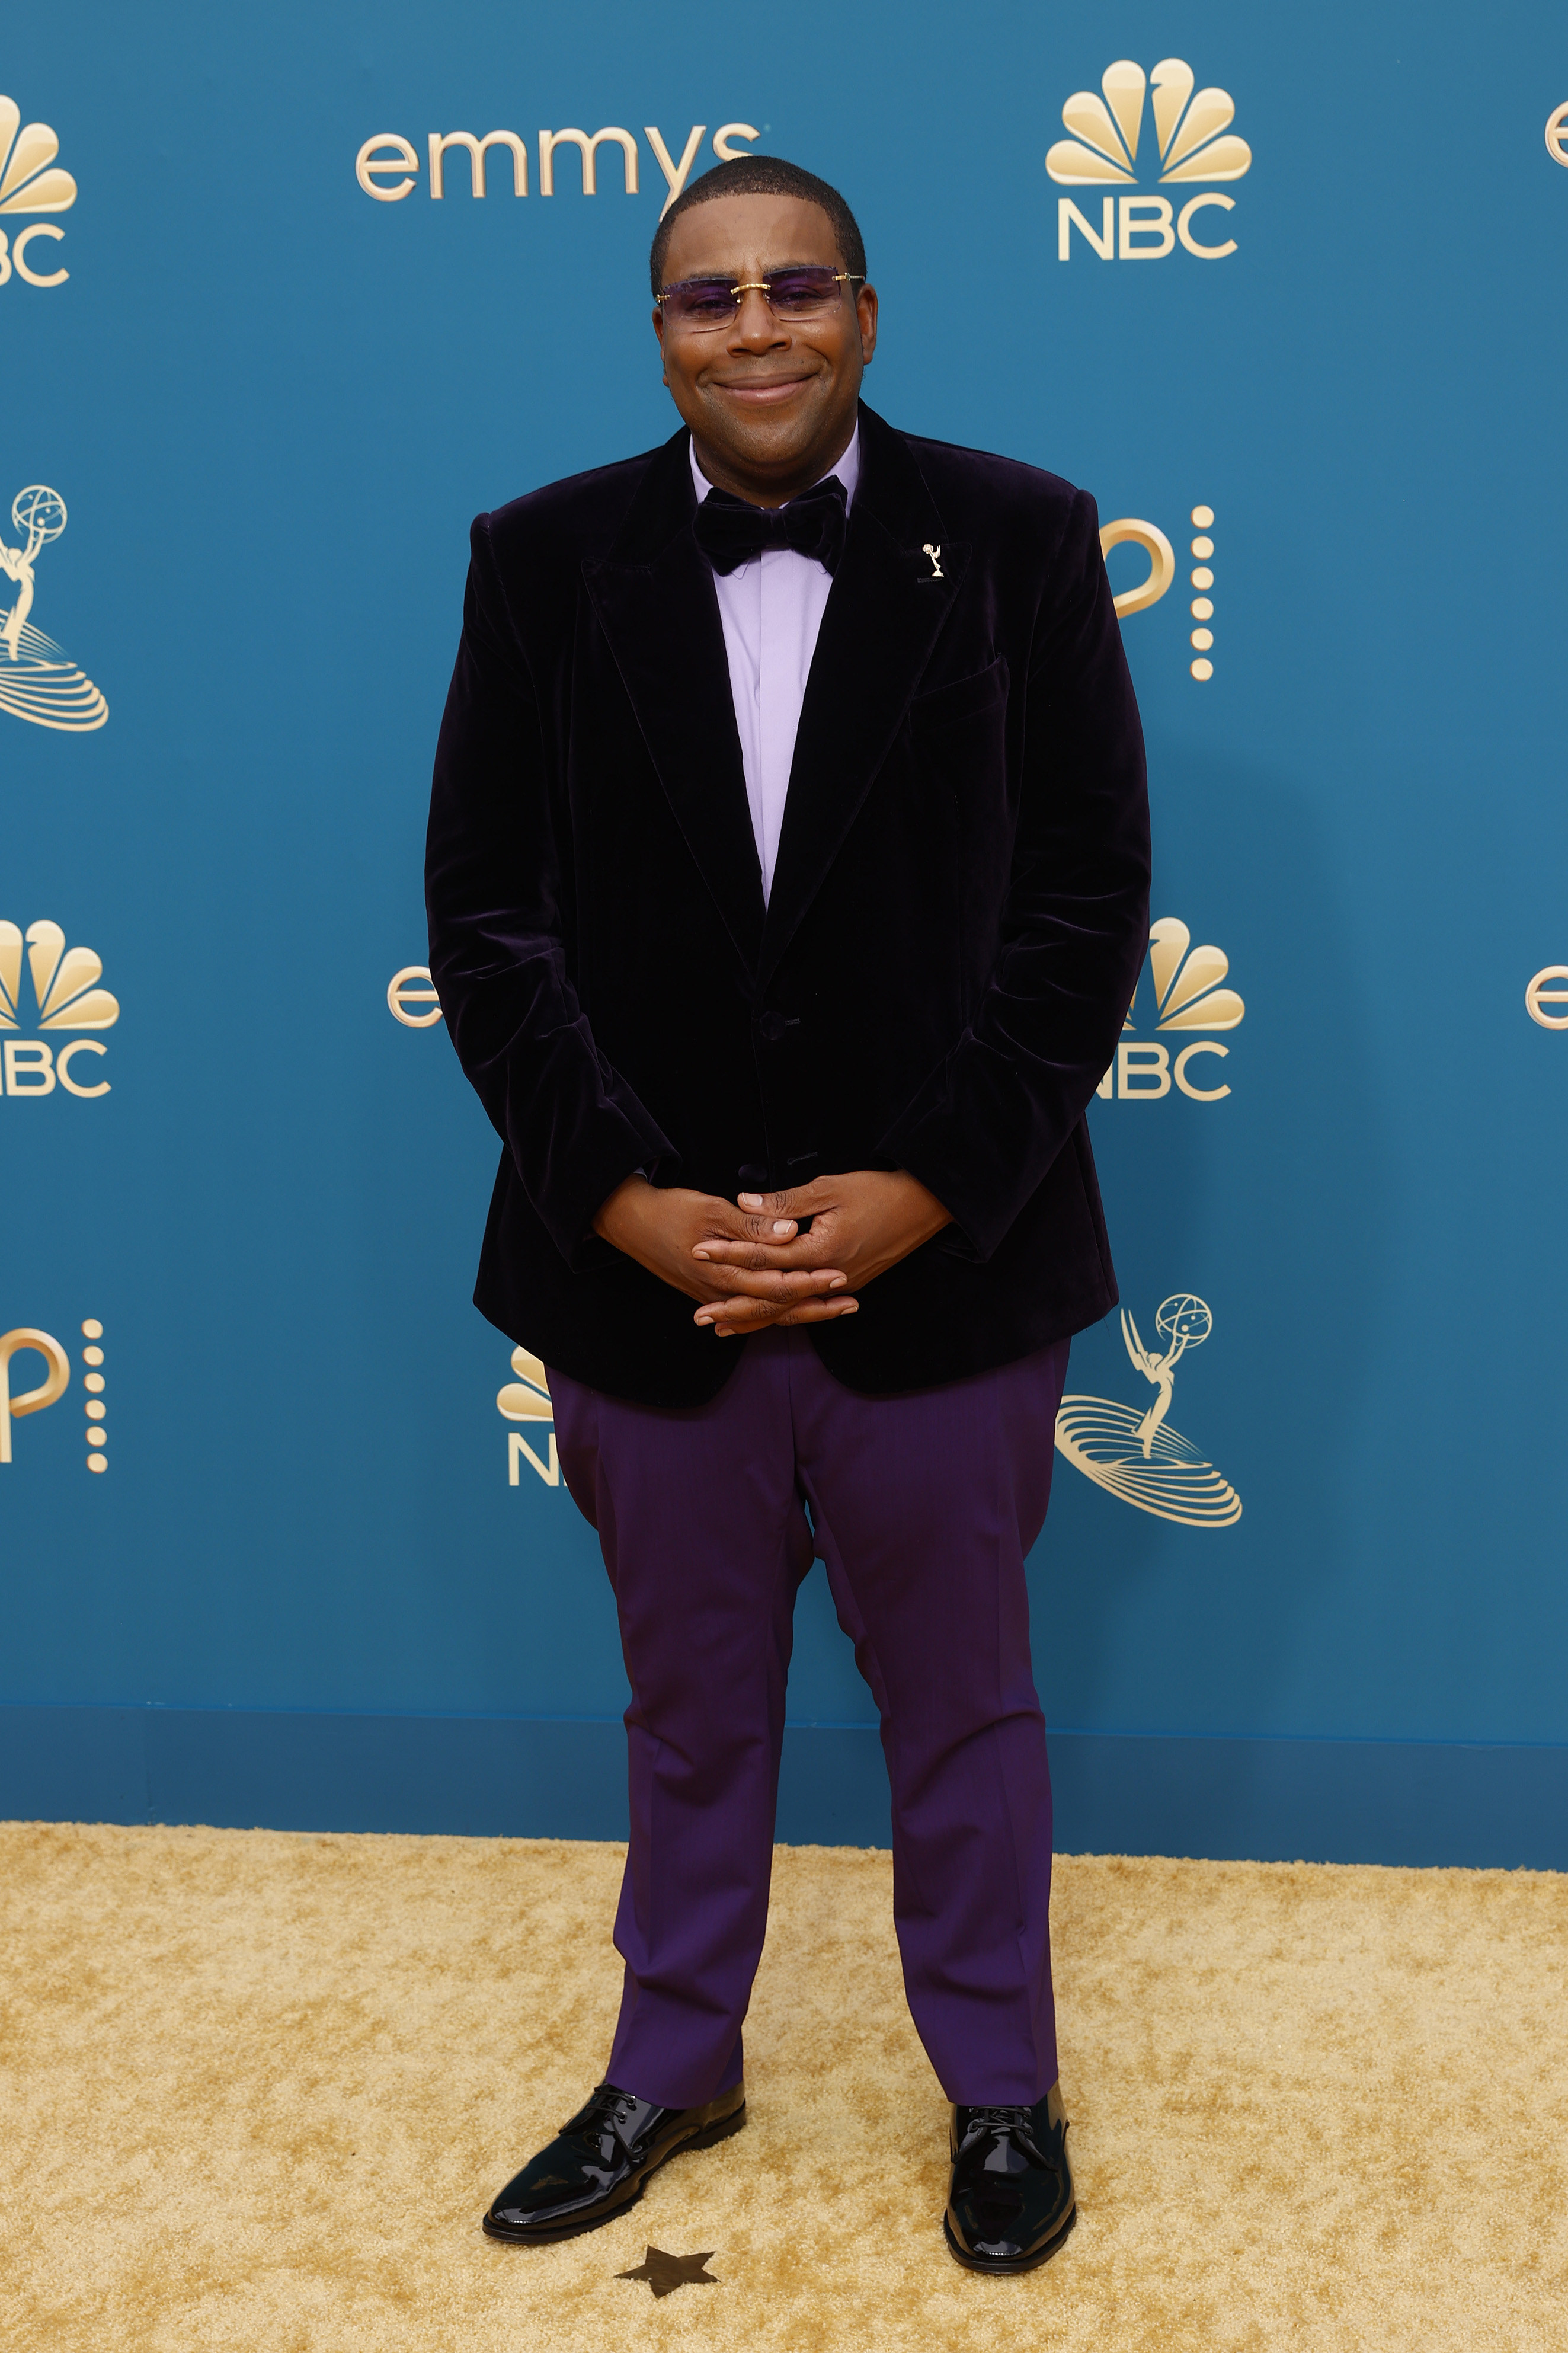 Kenan Thompson in a tux and sunglasses